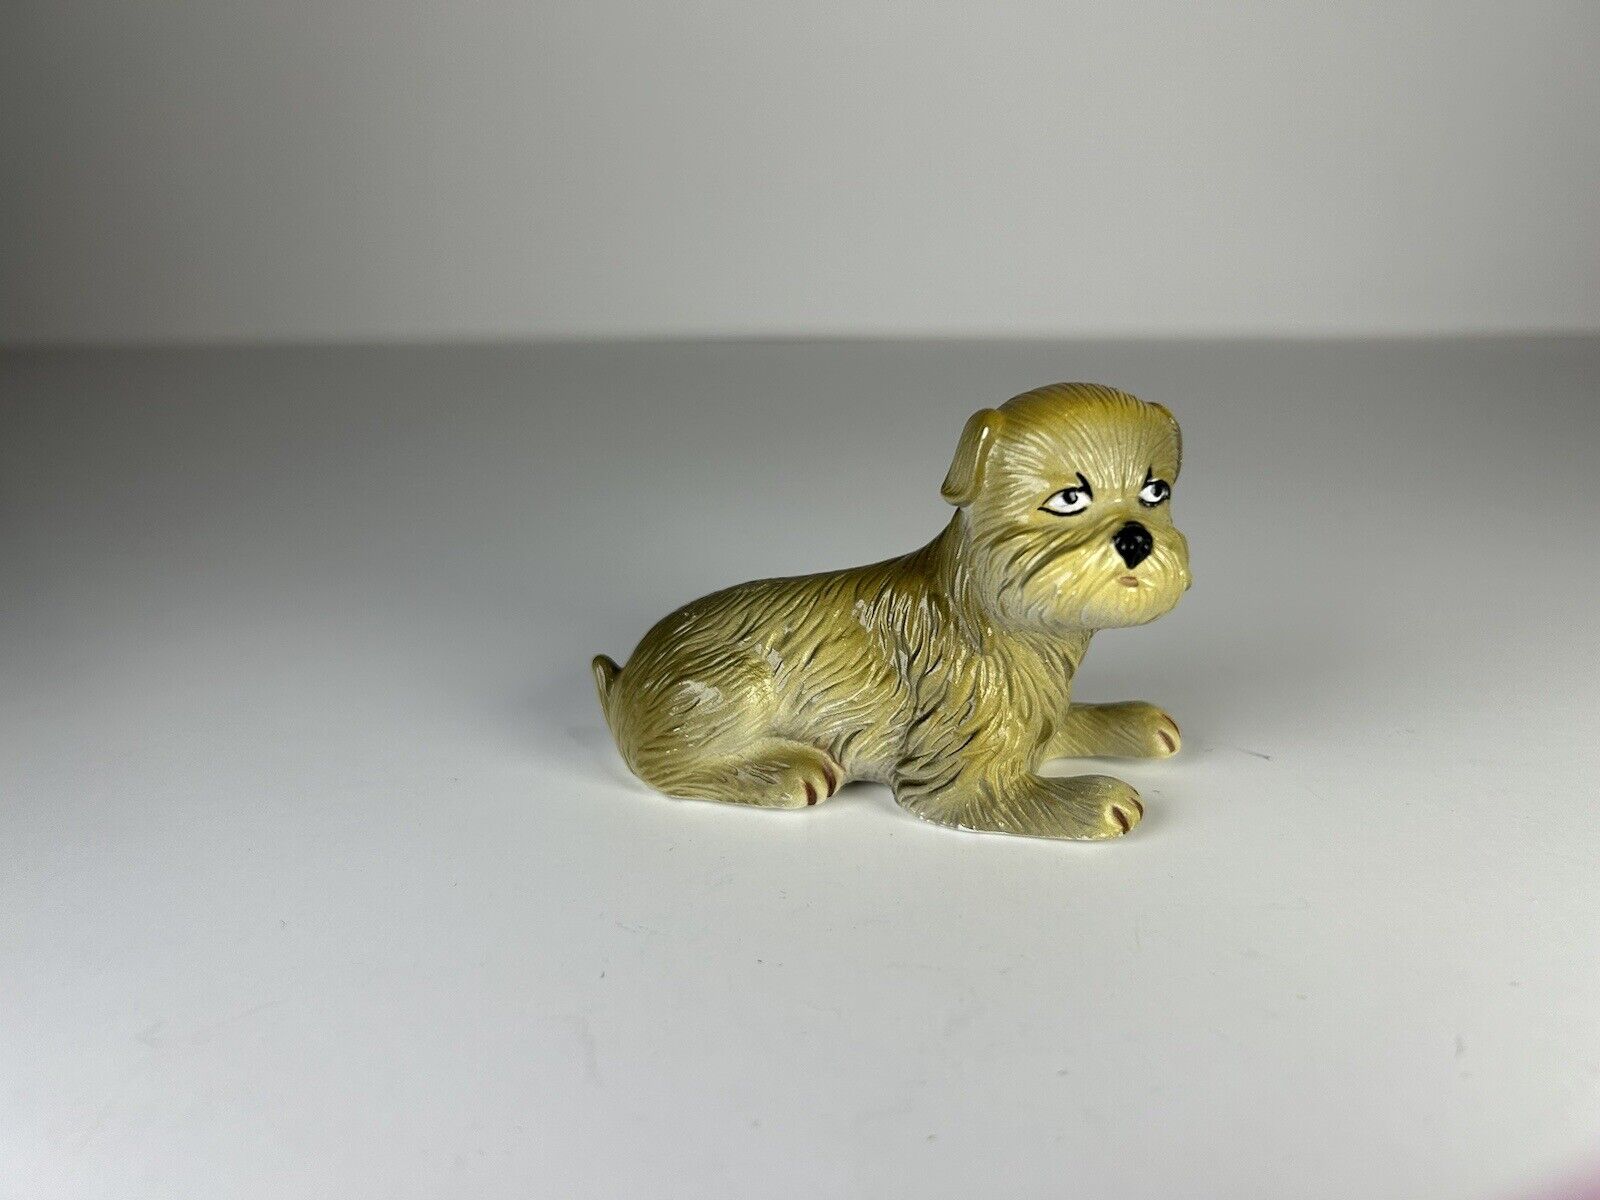 1988 NEW-RAY Griffon Bruxellois Dog Novelty Collectible Rubber Toy Figurine